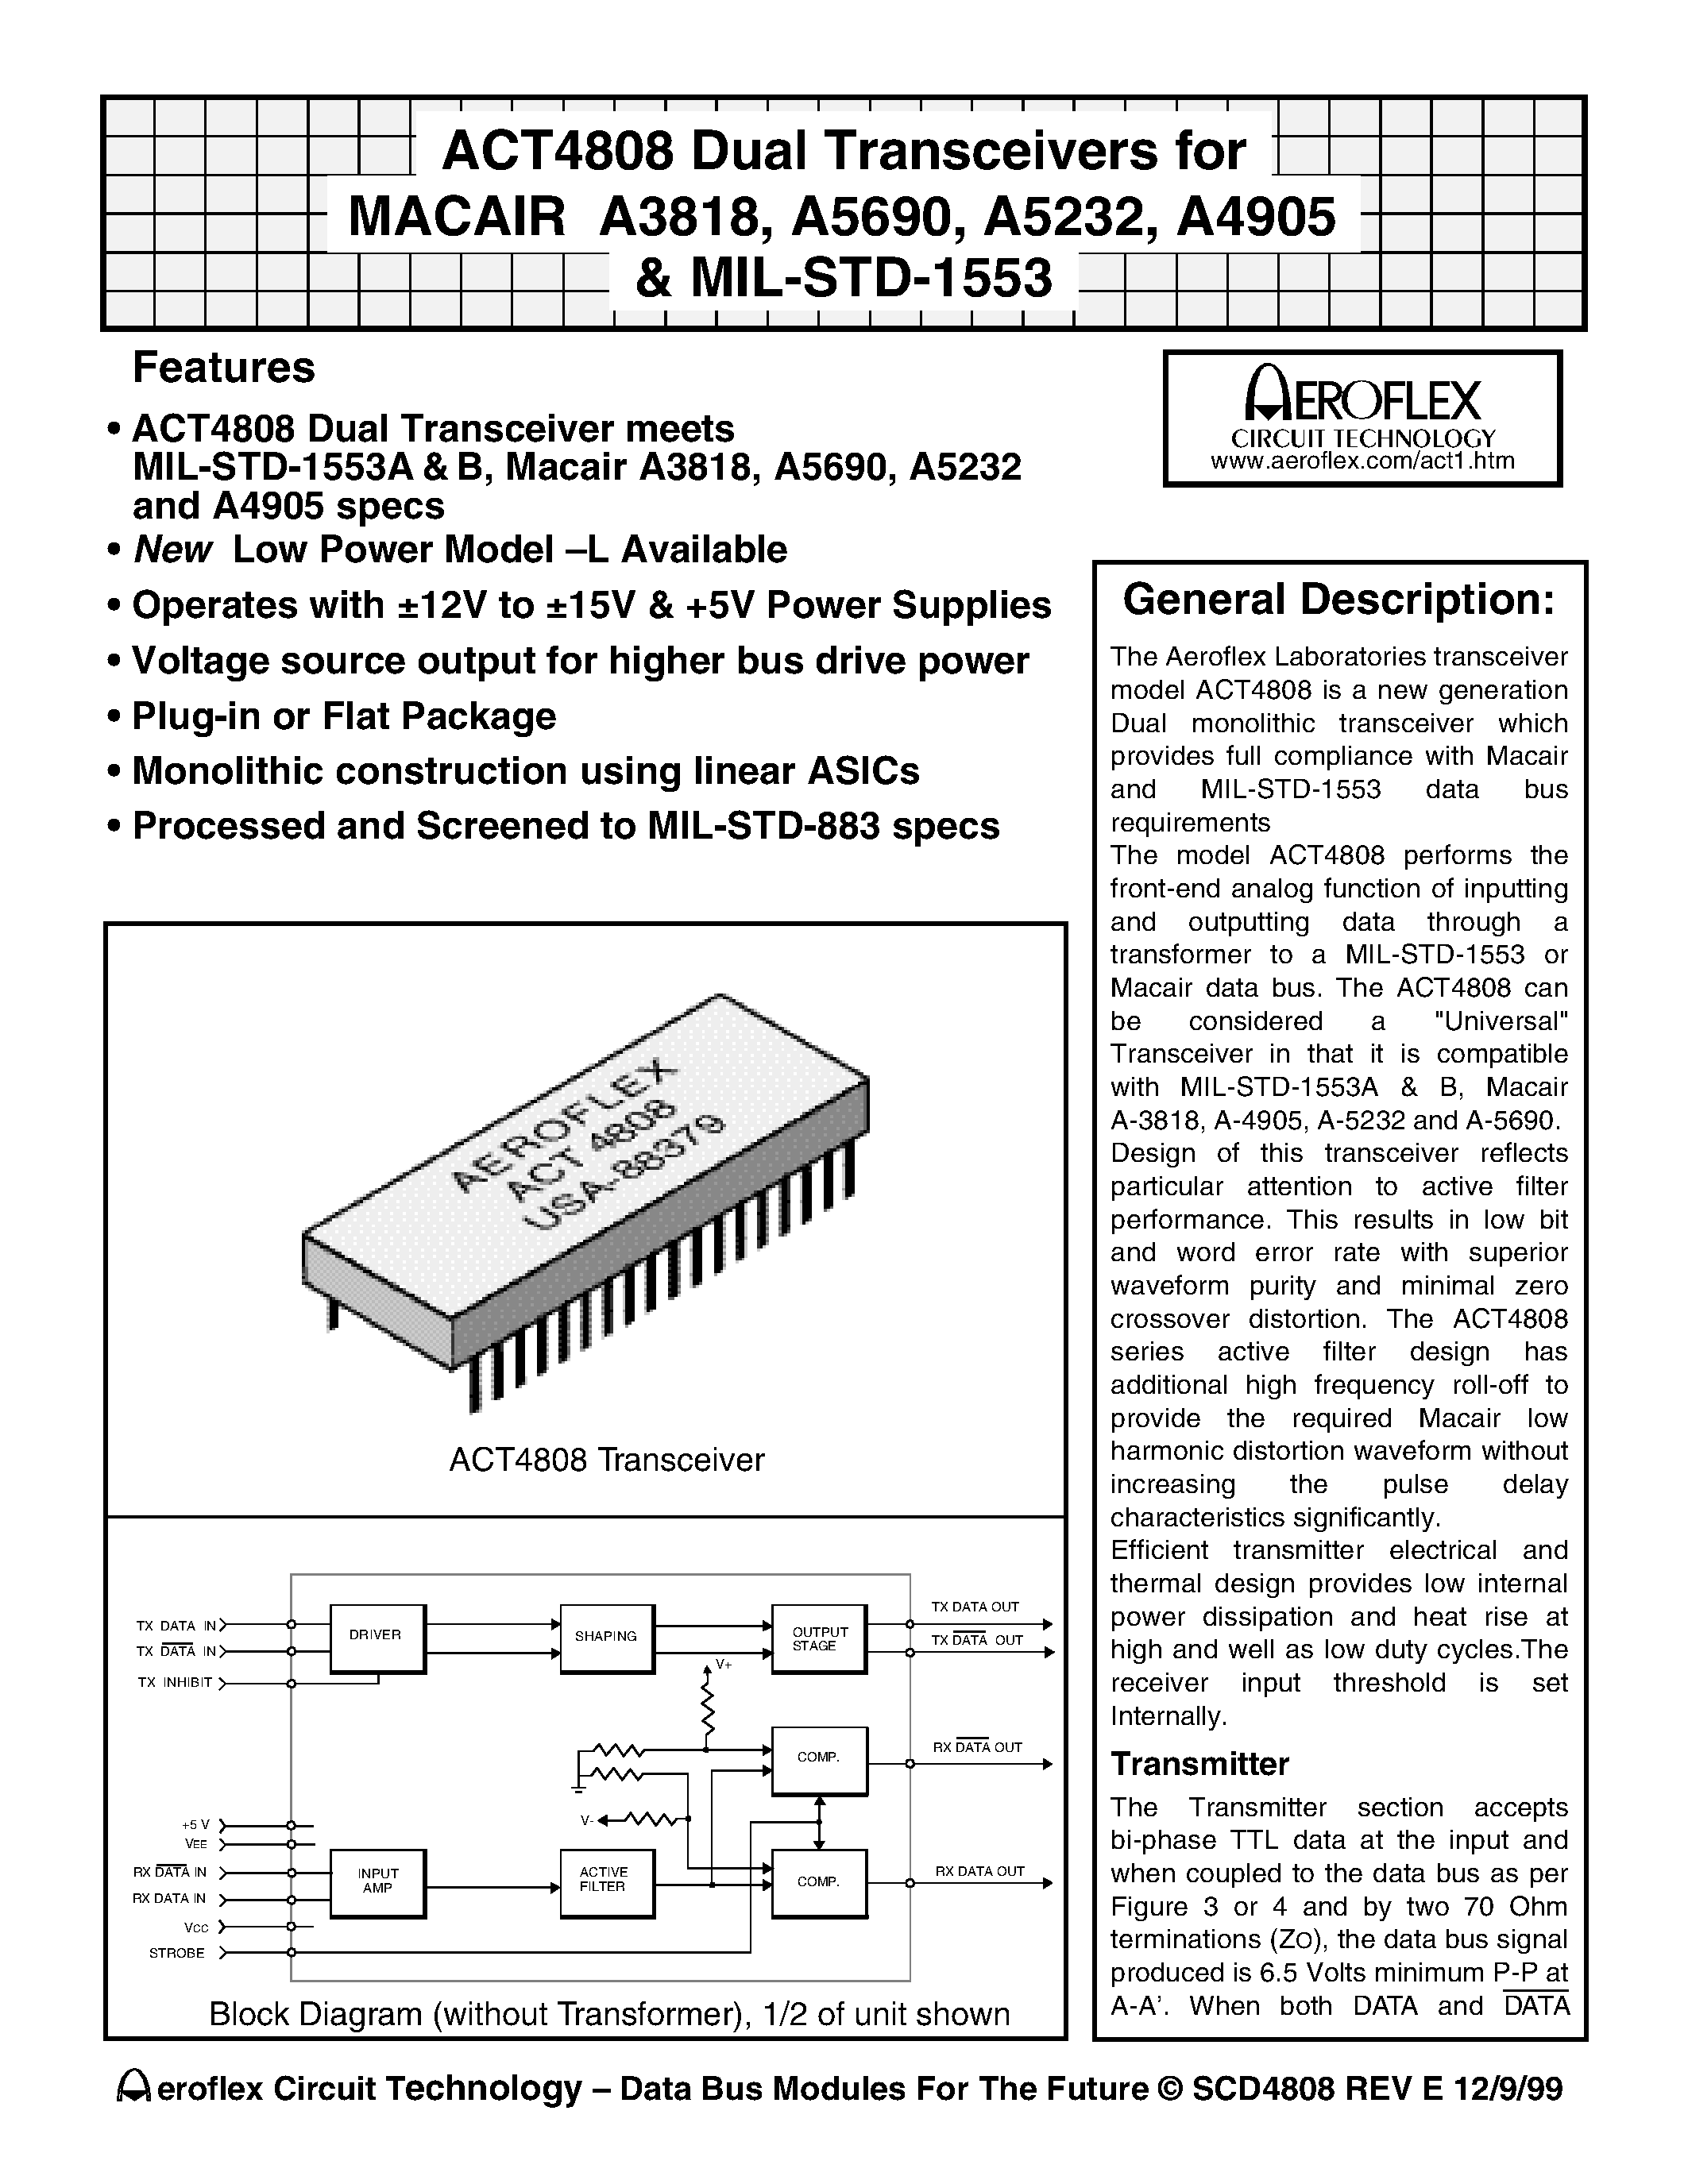 Datasheet ACT4808D - ACT4808 DUAL TRANSCEIVERS FOR MACAIR A3818/ A5690/ A5232/ A4905 & MIL-STD-1553 page 1